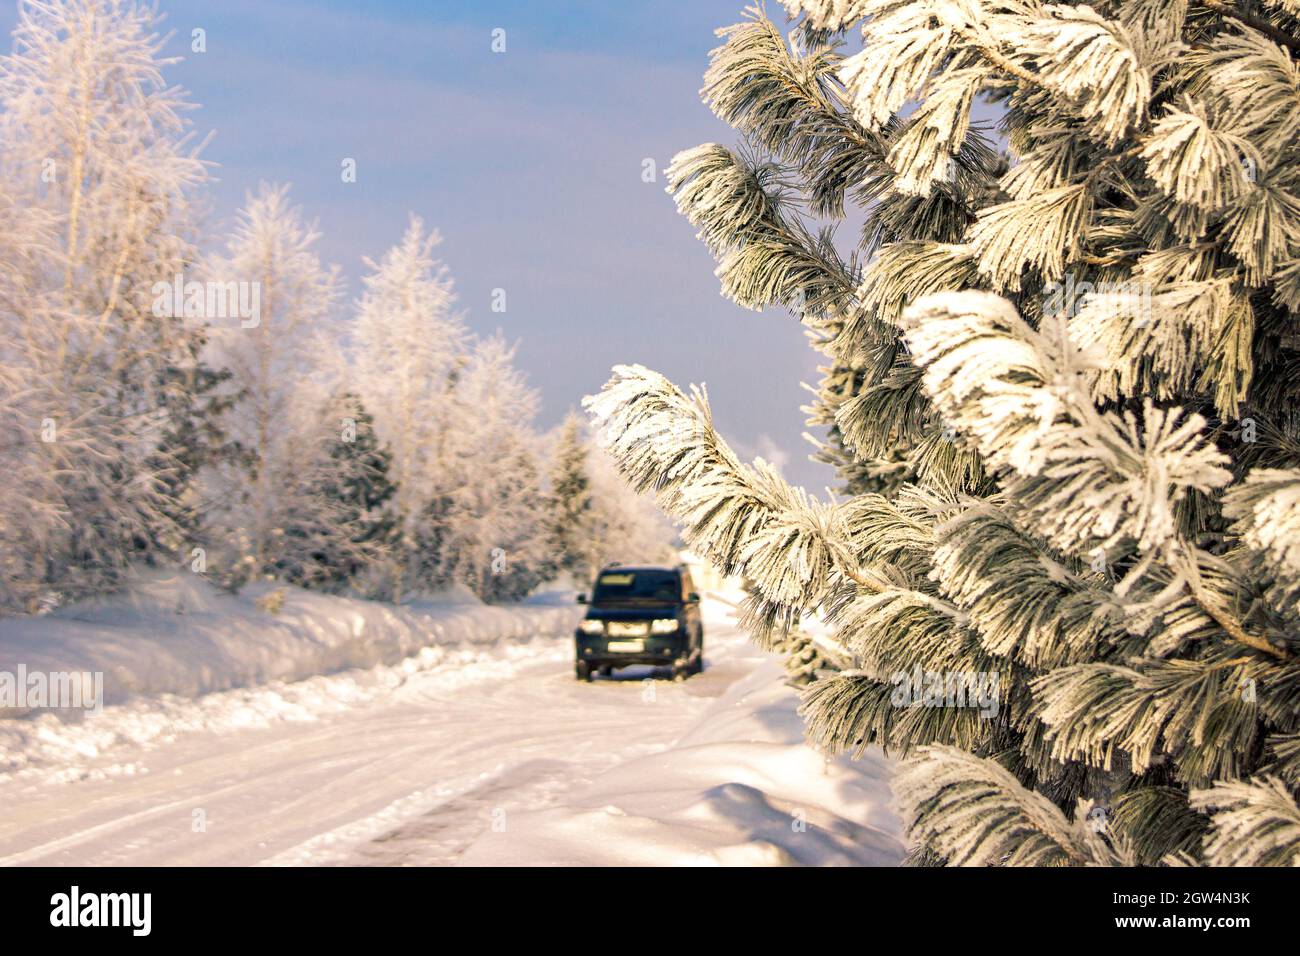 On a winter evening at the edge of the road, a pine branch is covered with frost after a hard frost. An off-road vehicle standing motionless is seen i Stock Photo